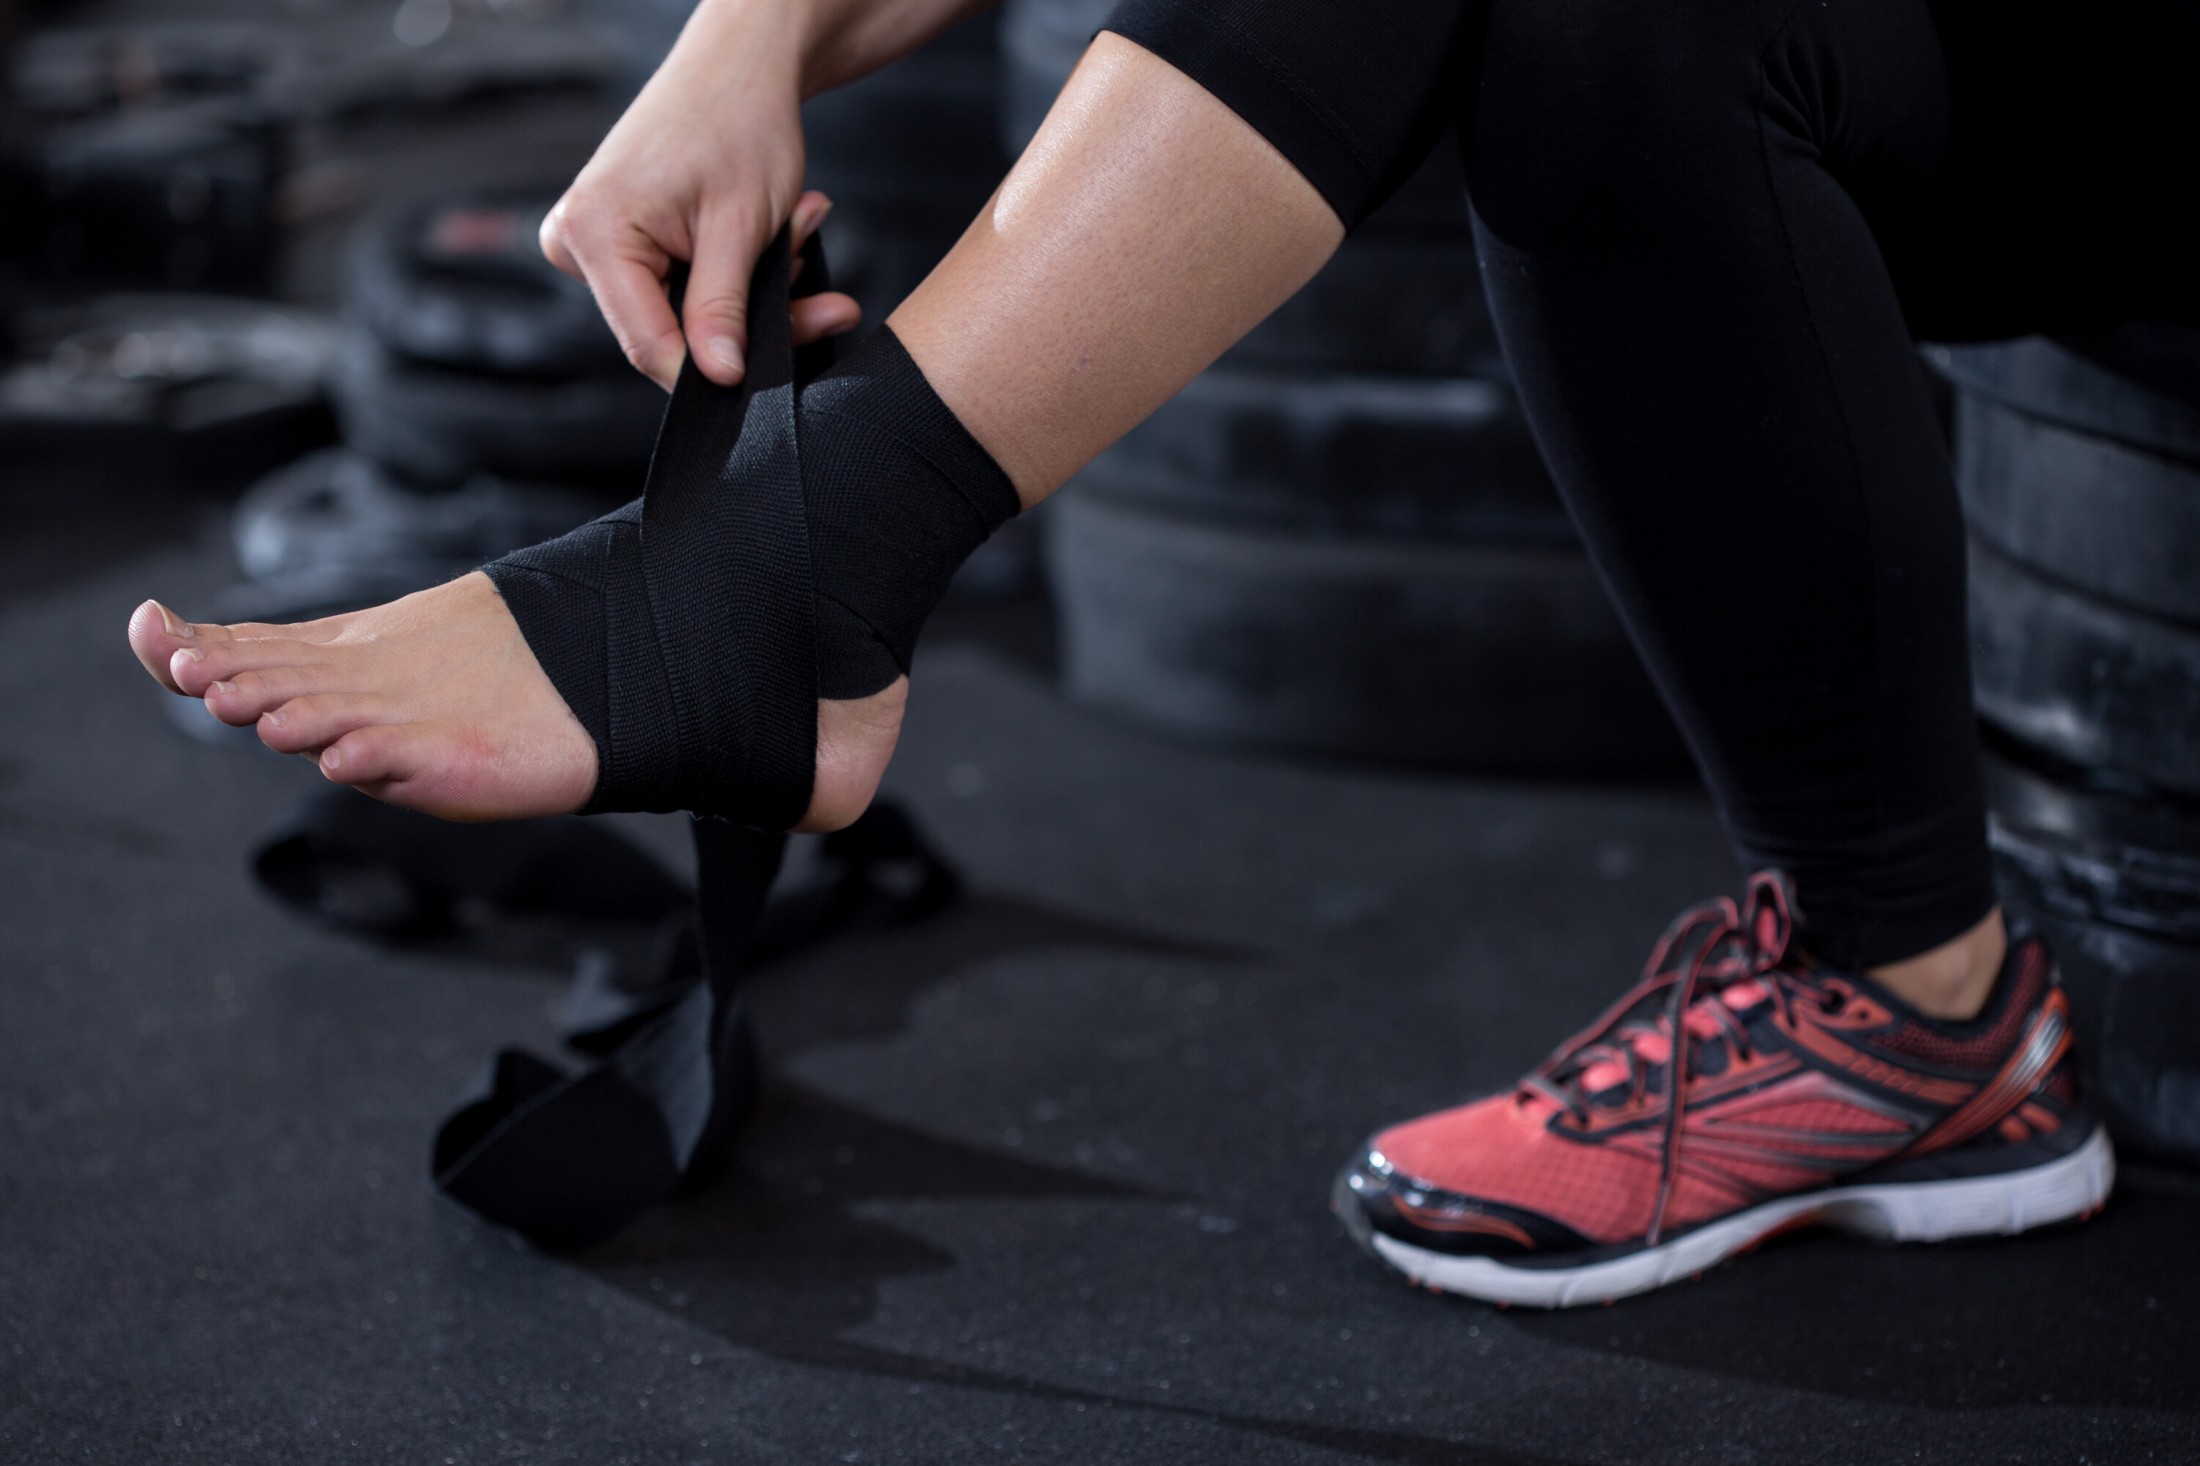 Ankle Brace to Help Treat Injury or Pain